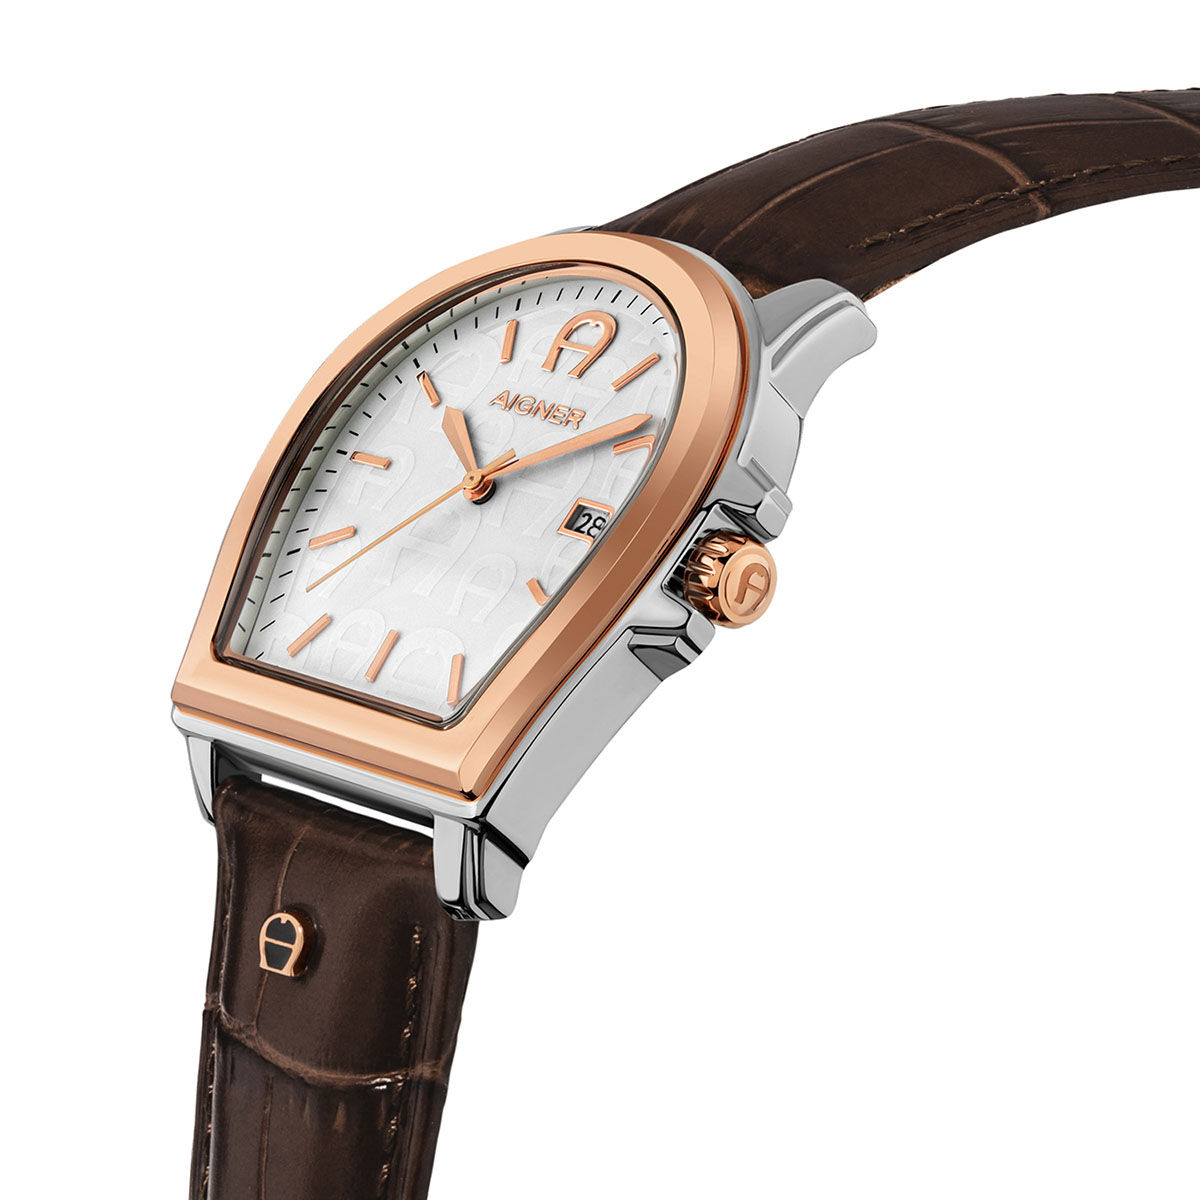 The most beautiful classic women's watches with a metal strap in Jordan